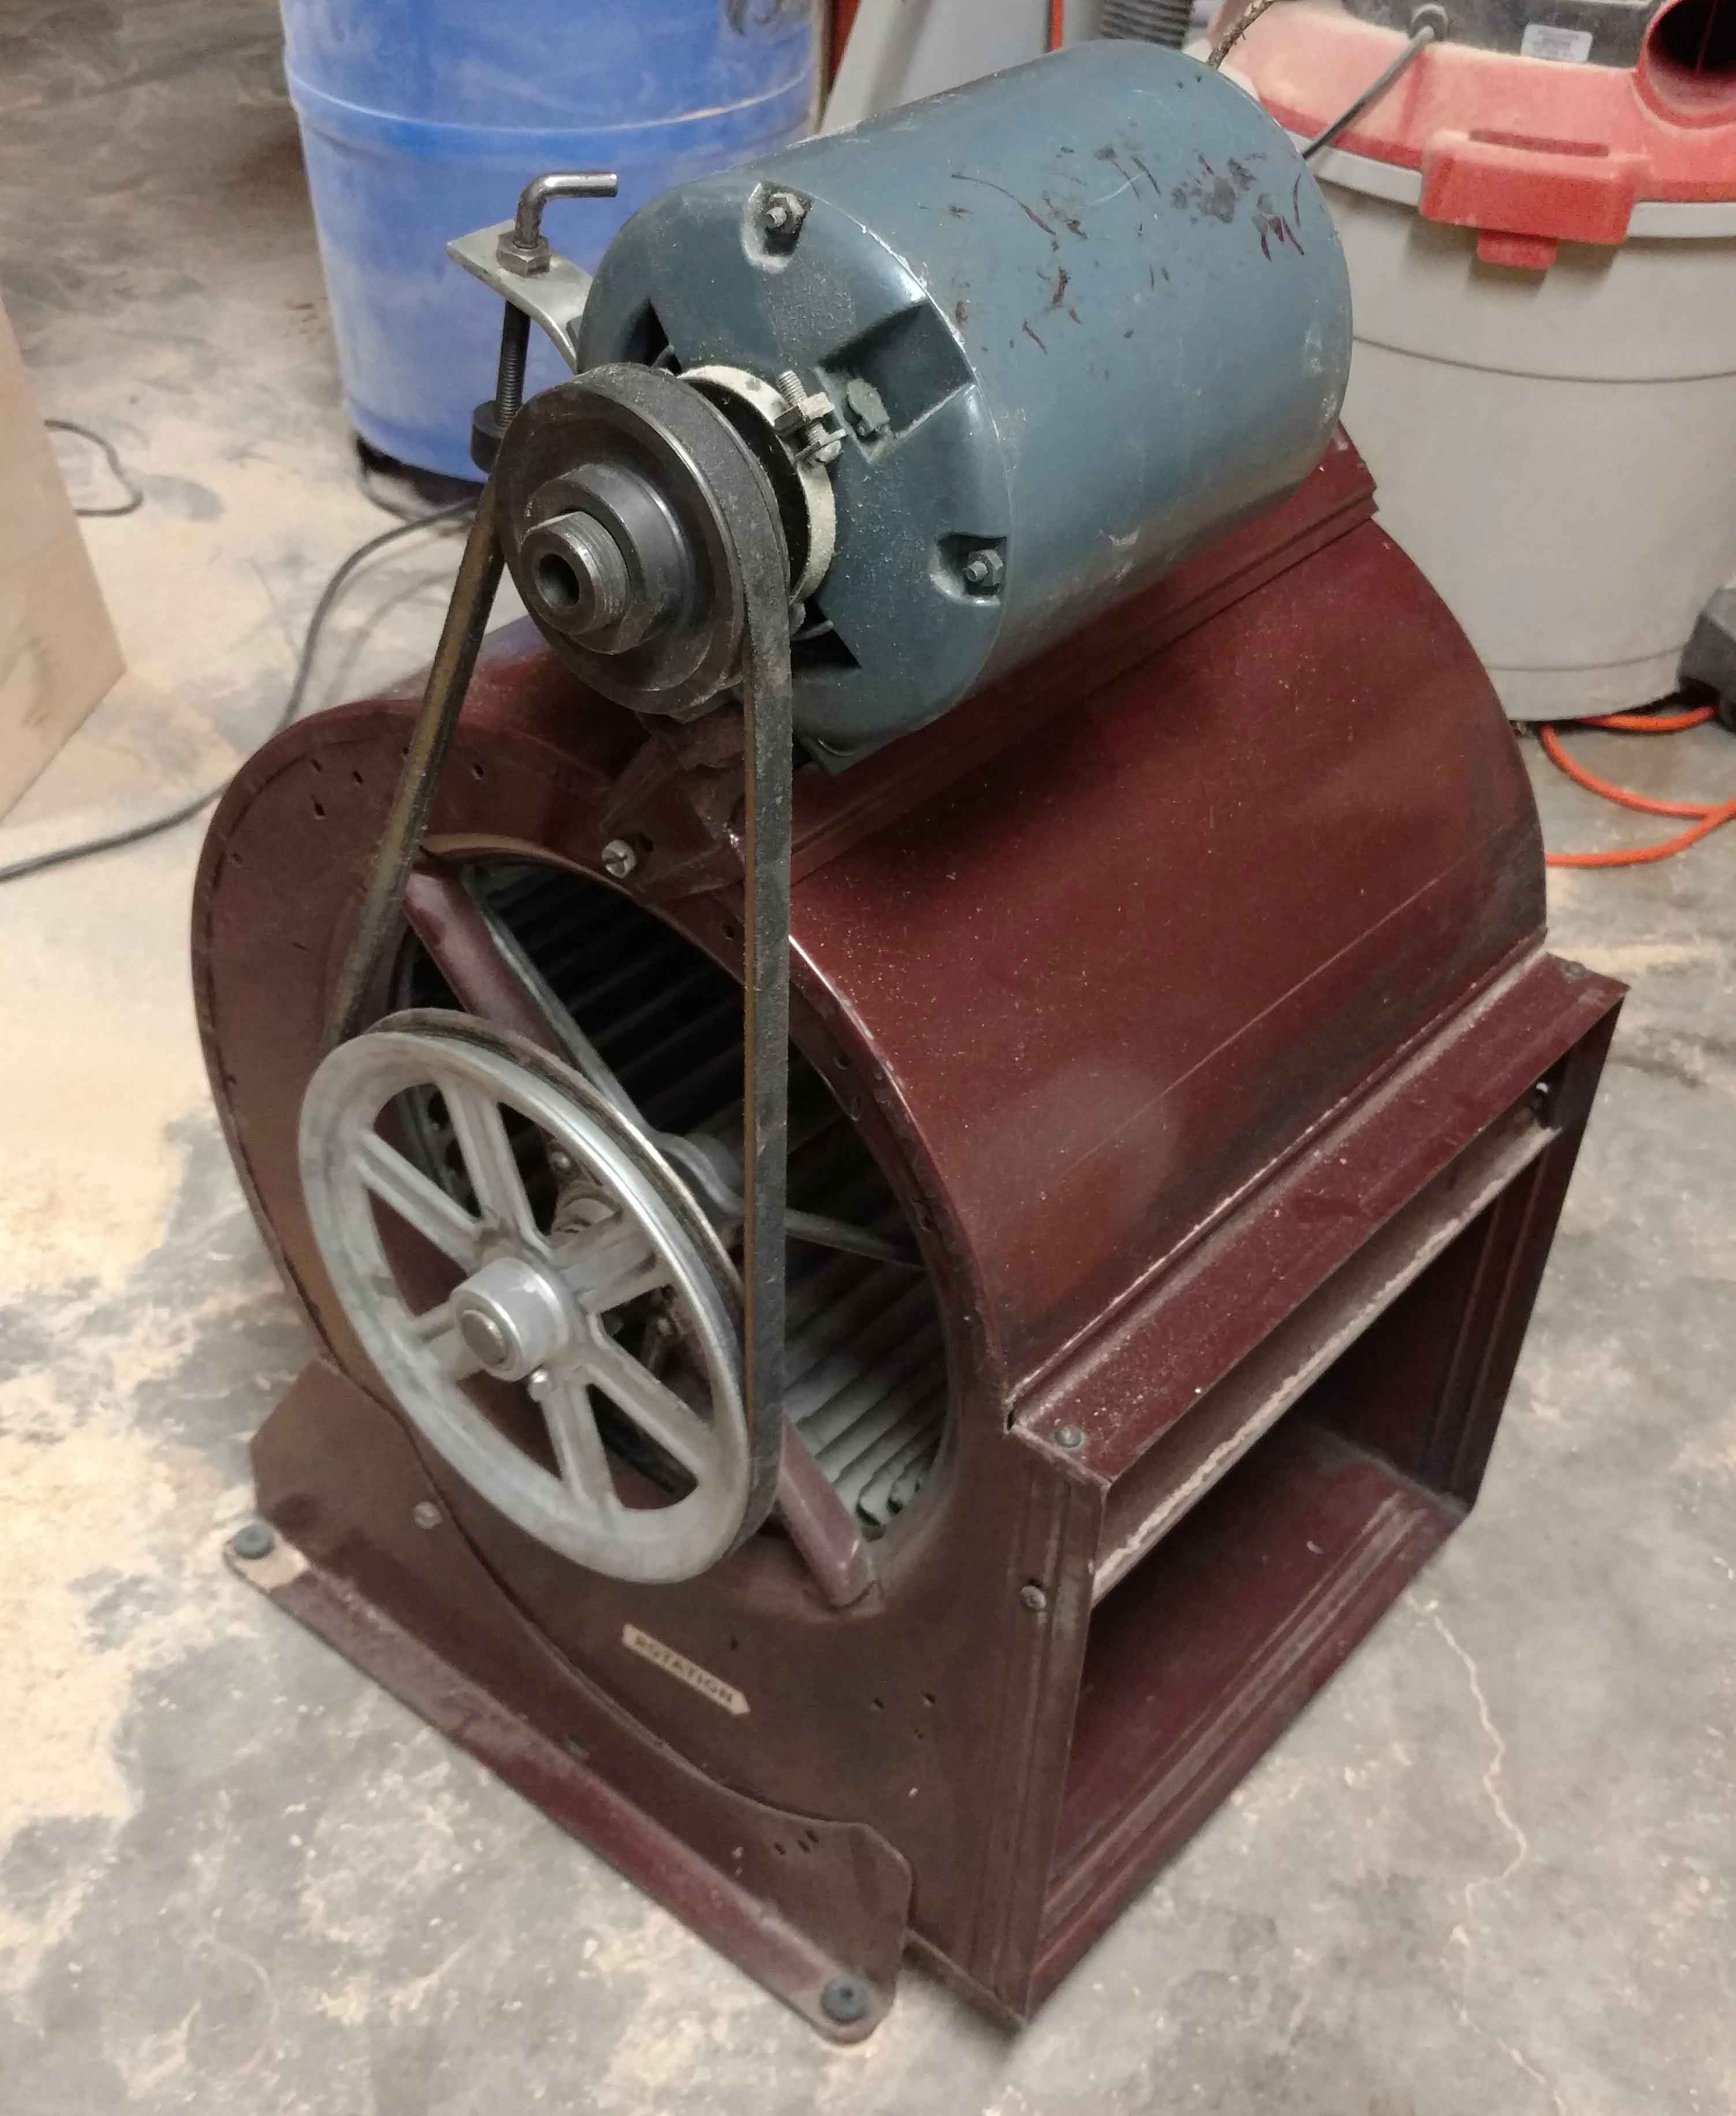 squirrel-cage blower and motor